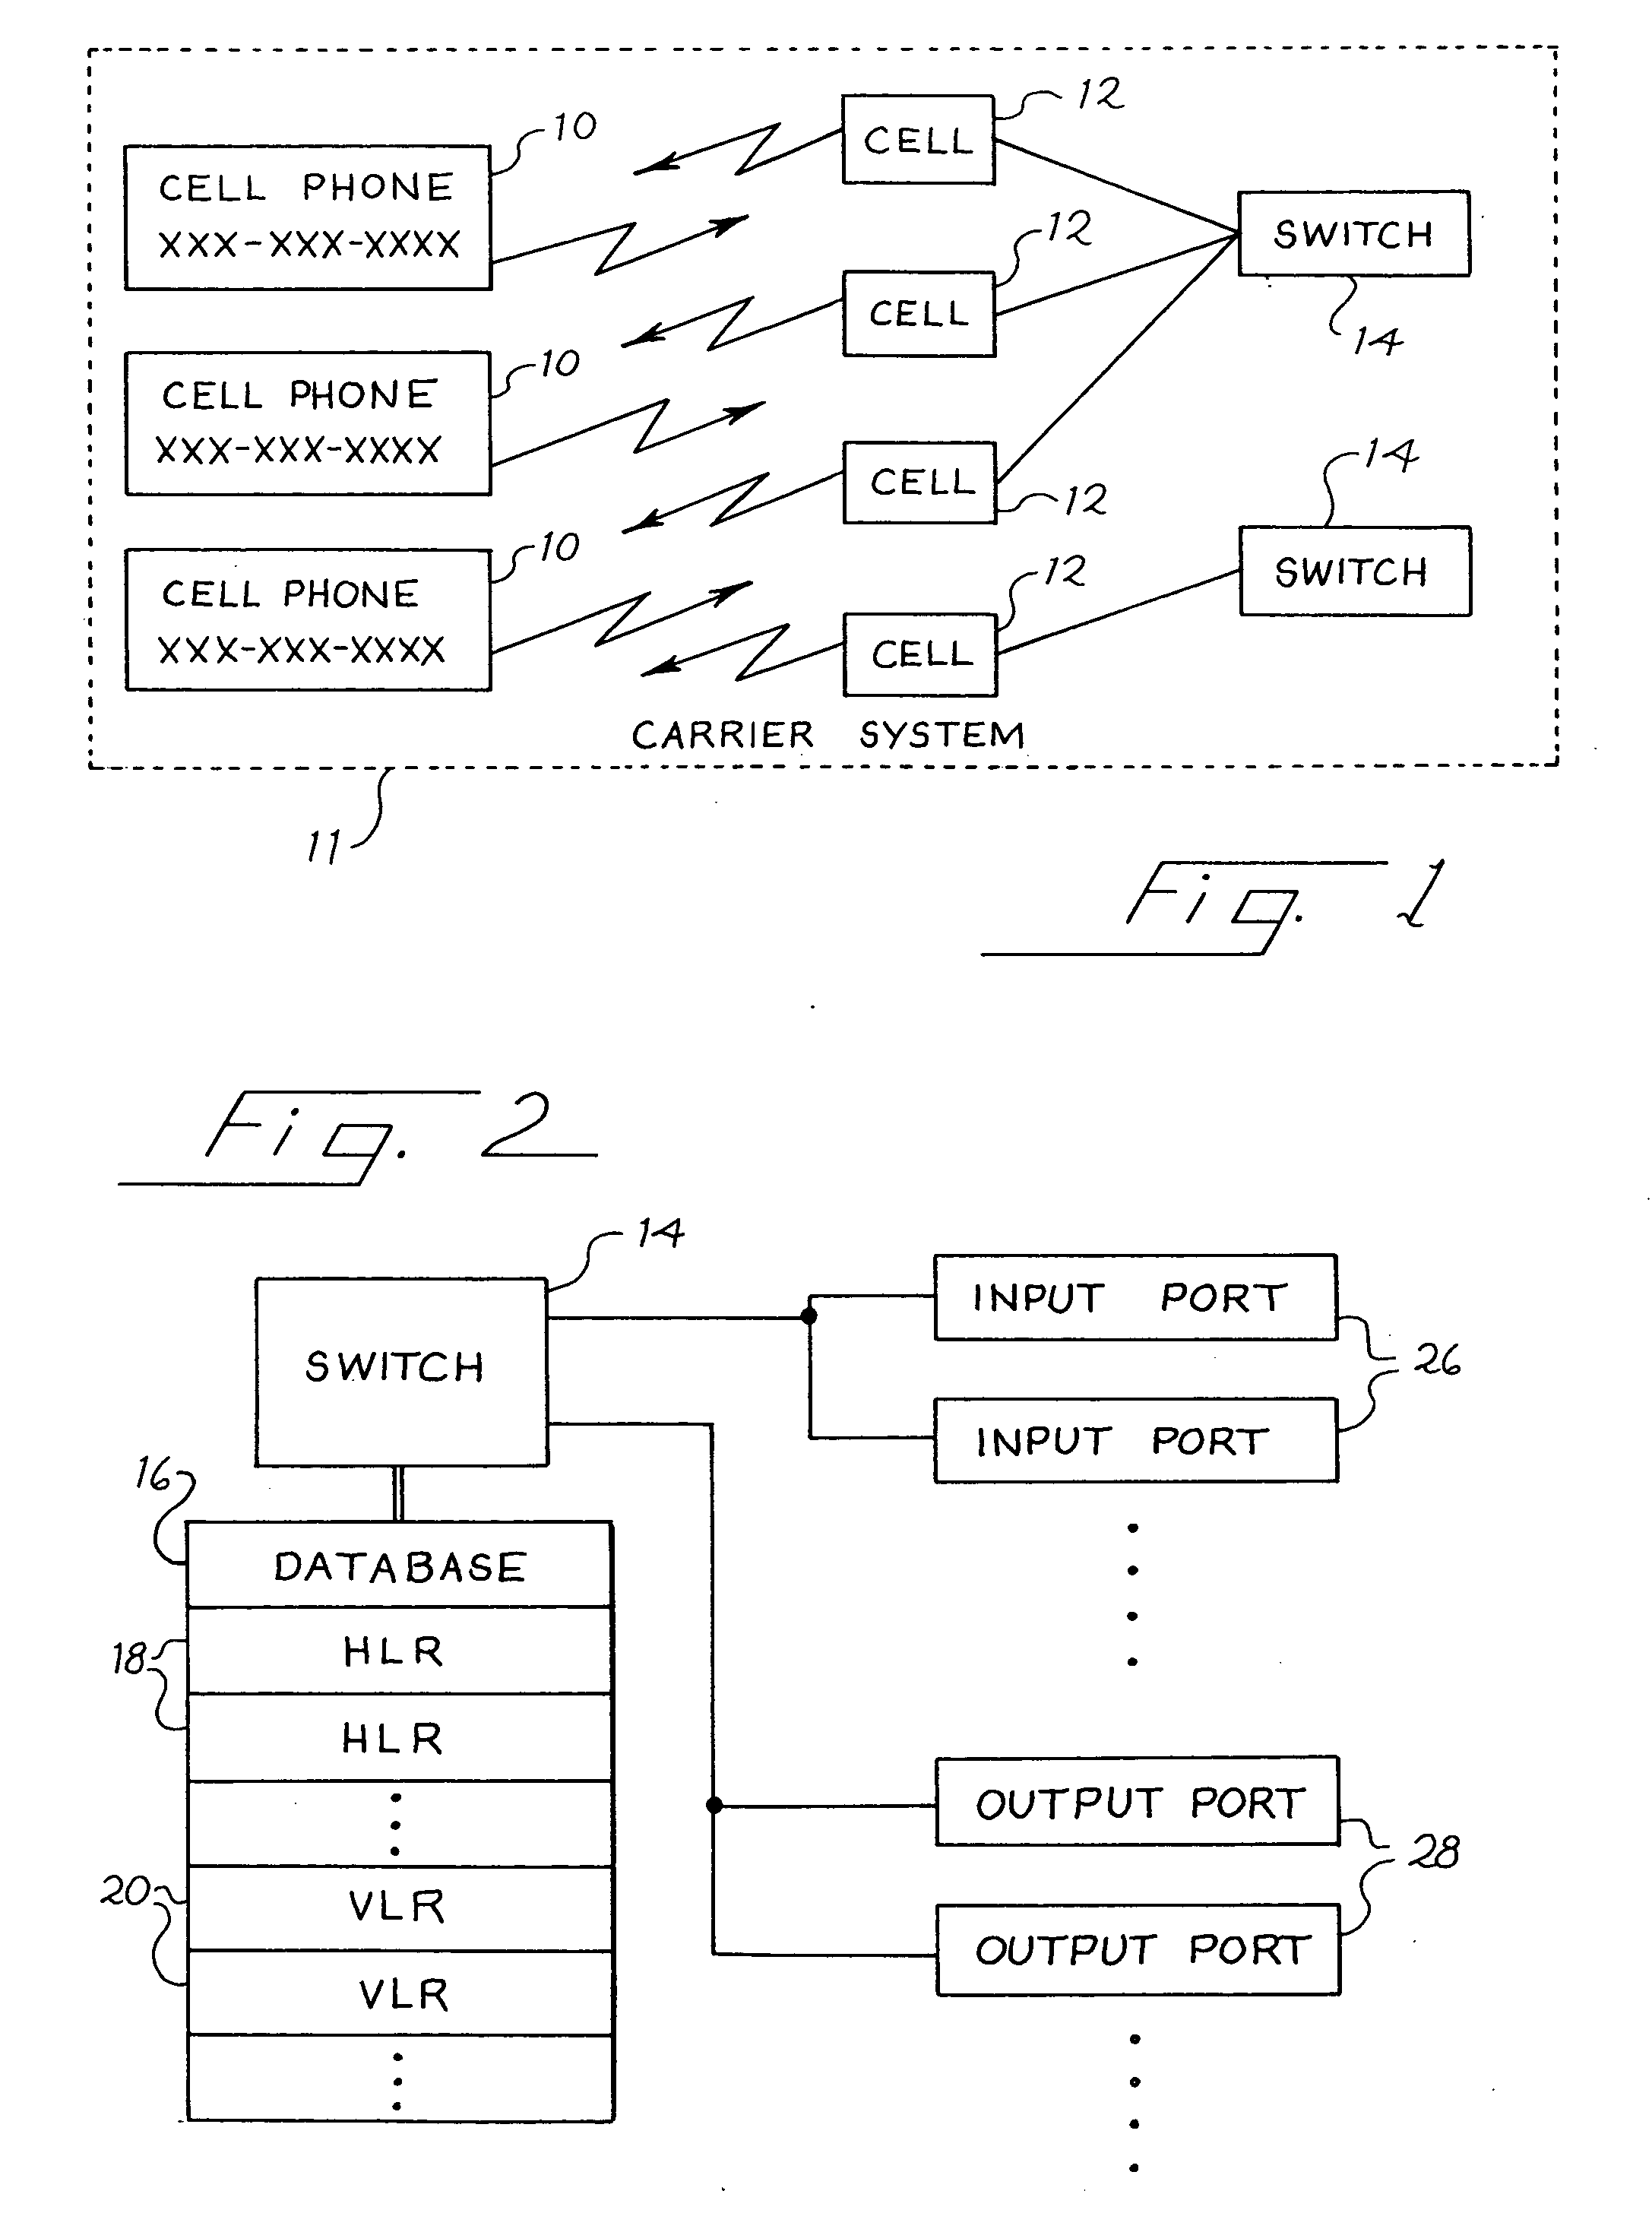 Communications system having pre-defined calling group